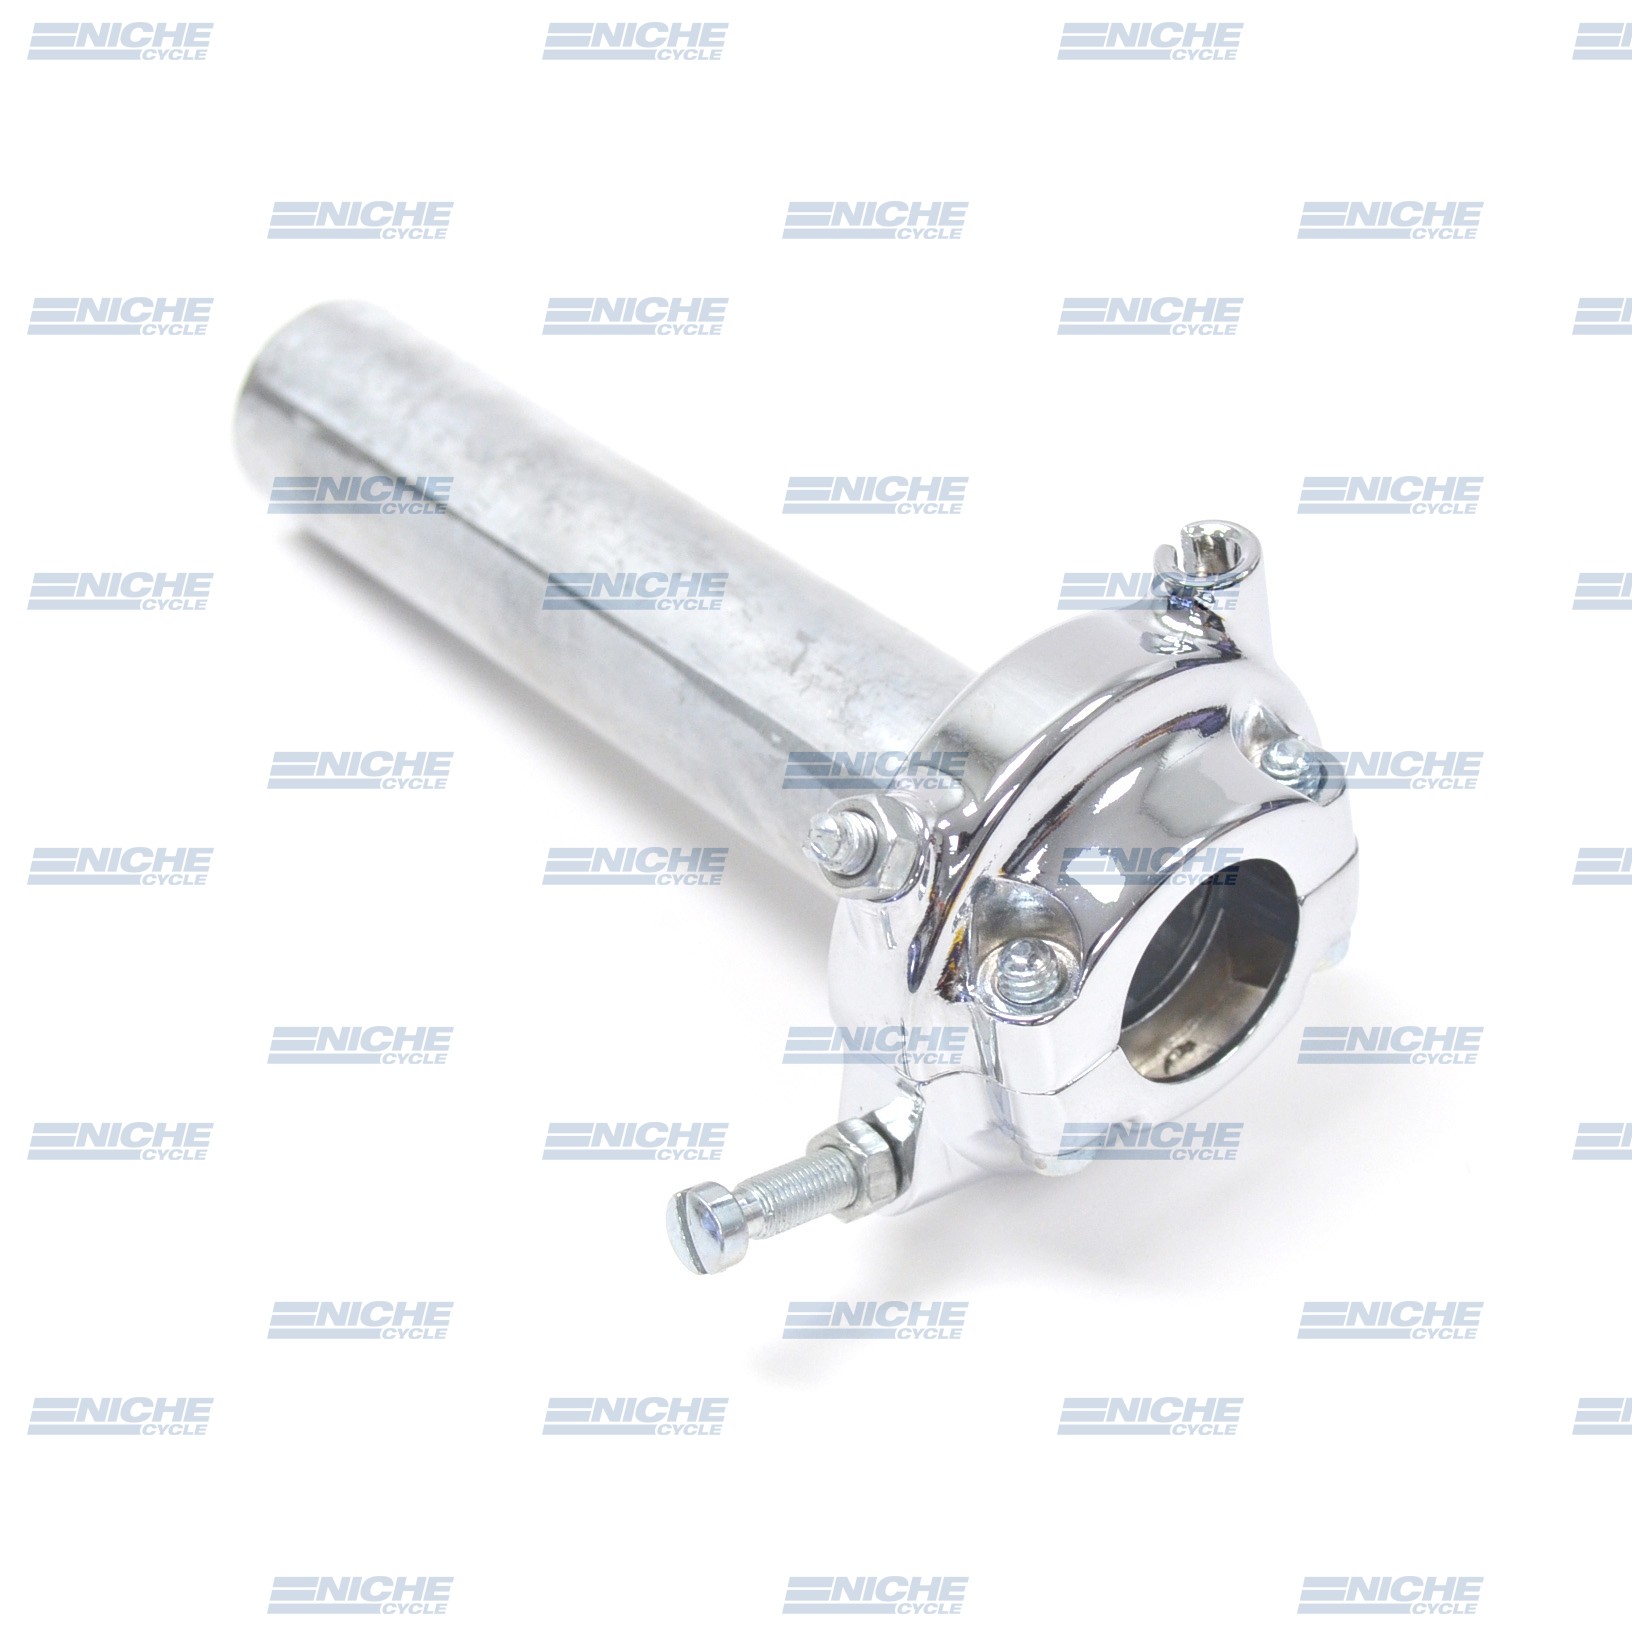 Amal-Style Replica Single Cable 364 Throttle   60-7014/P